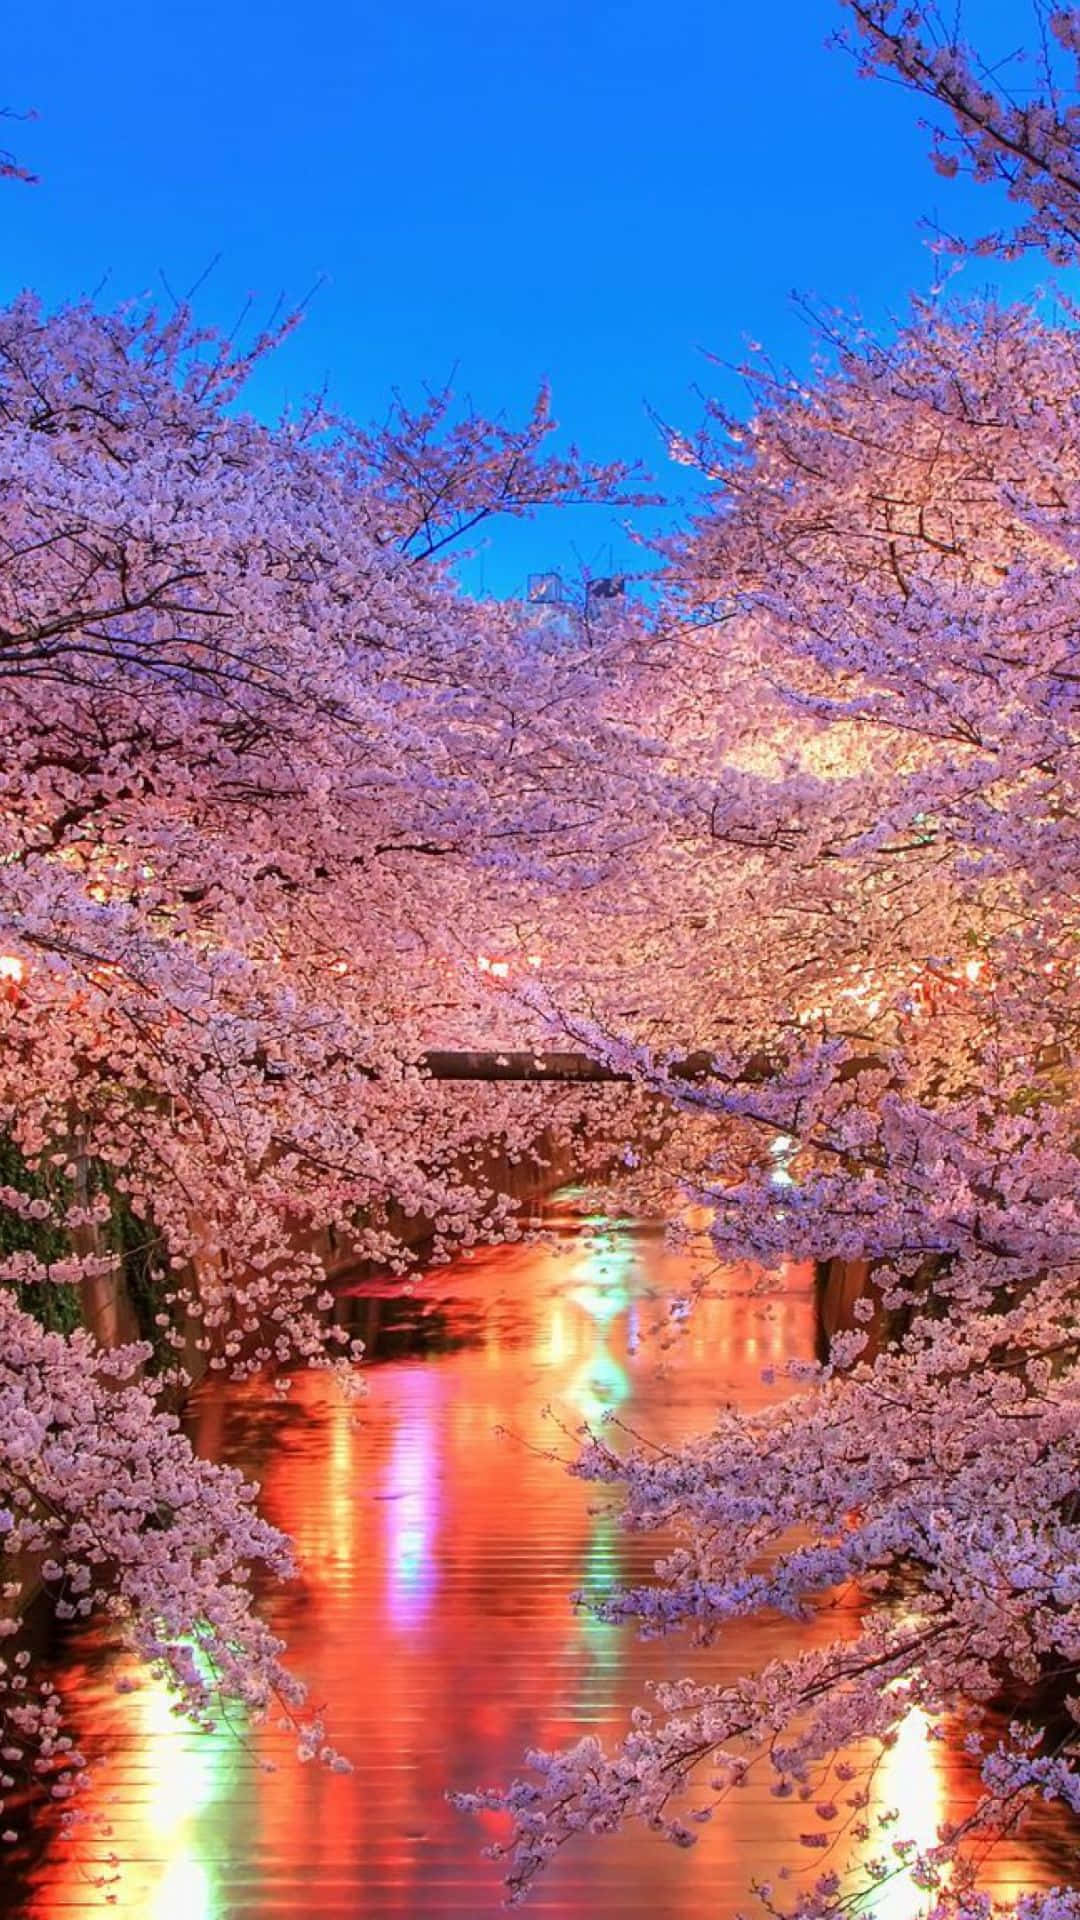 Magical night view of cherry blossom in full bloom Wallpaper